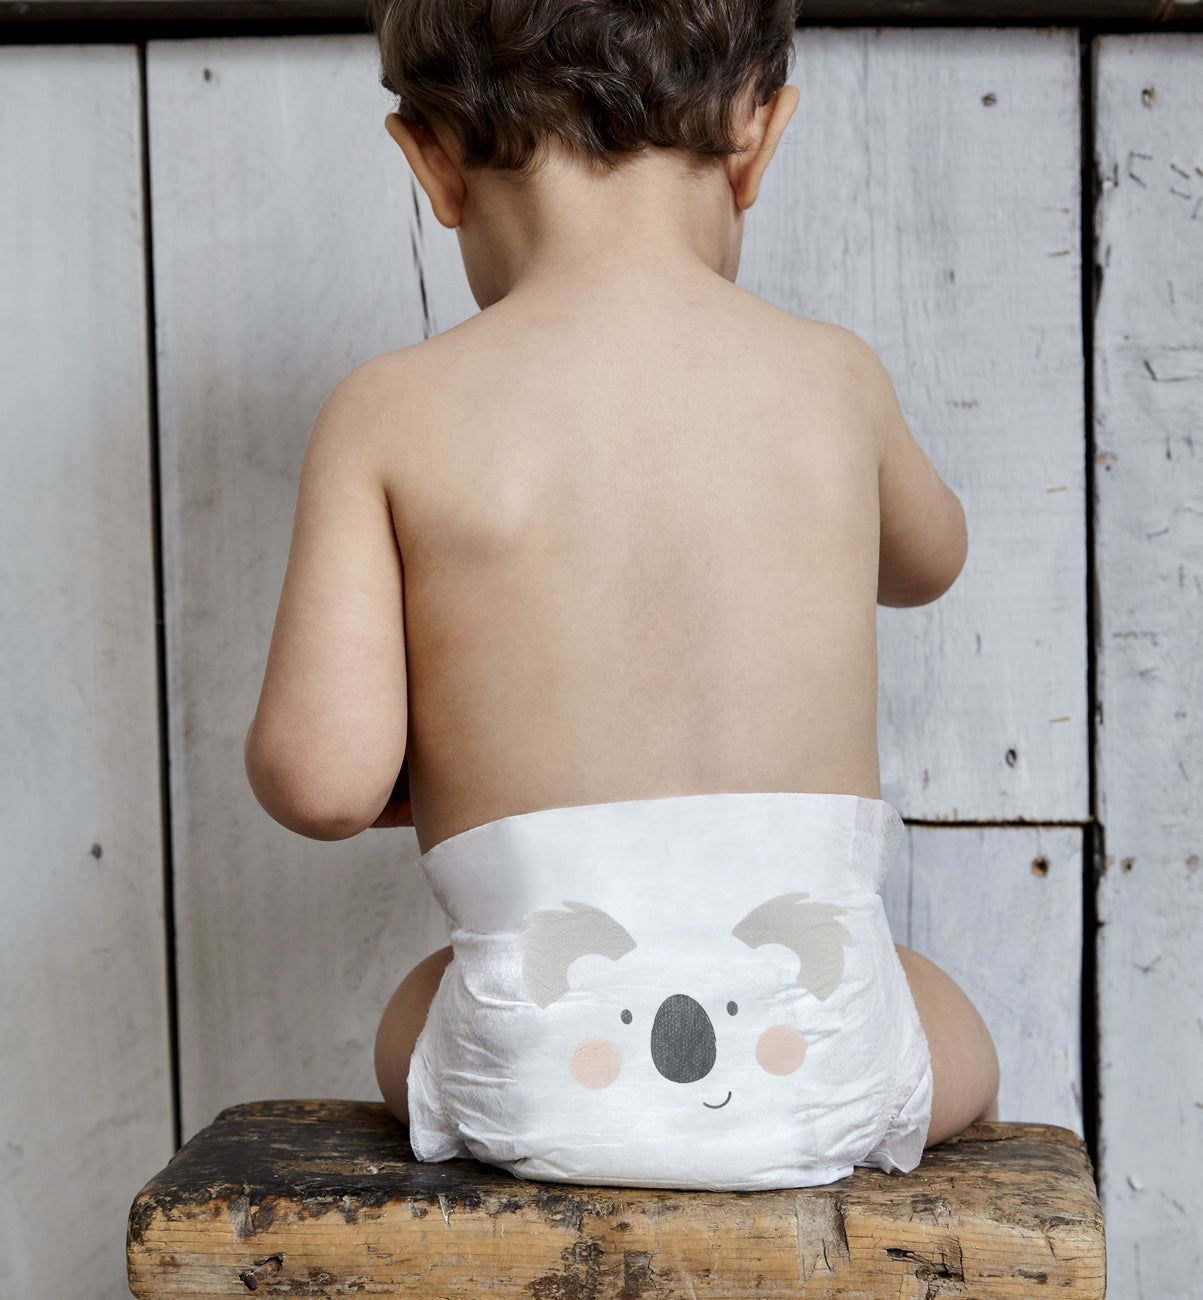 Eco nappies trial pack